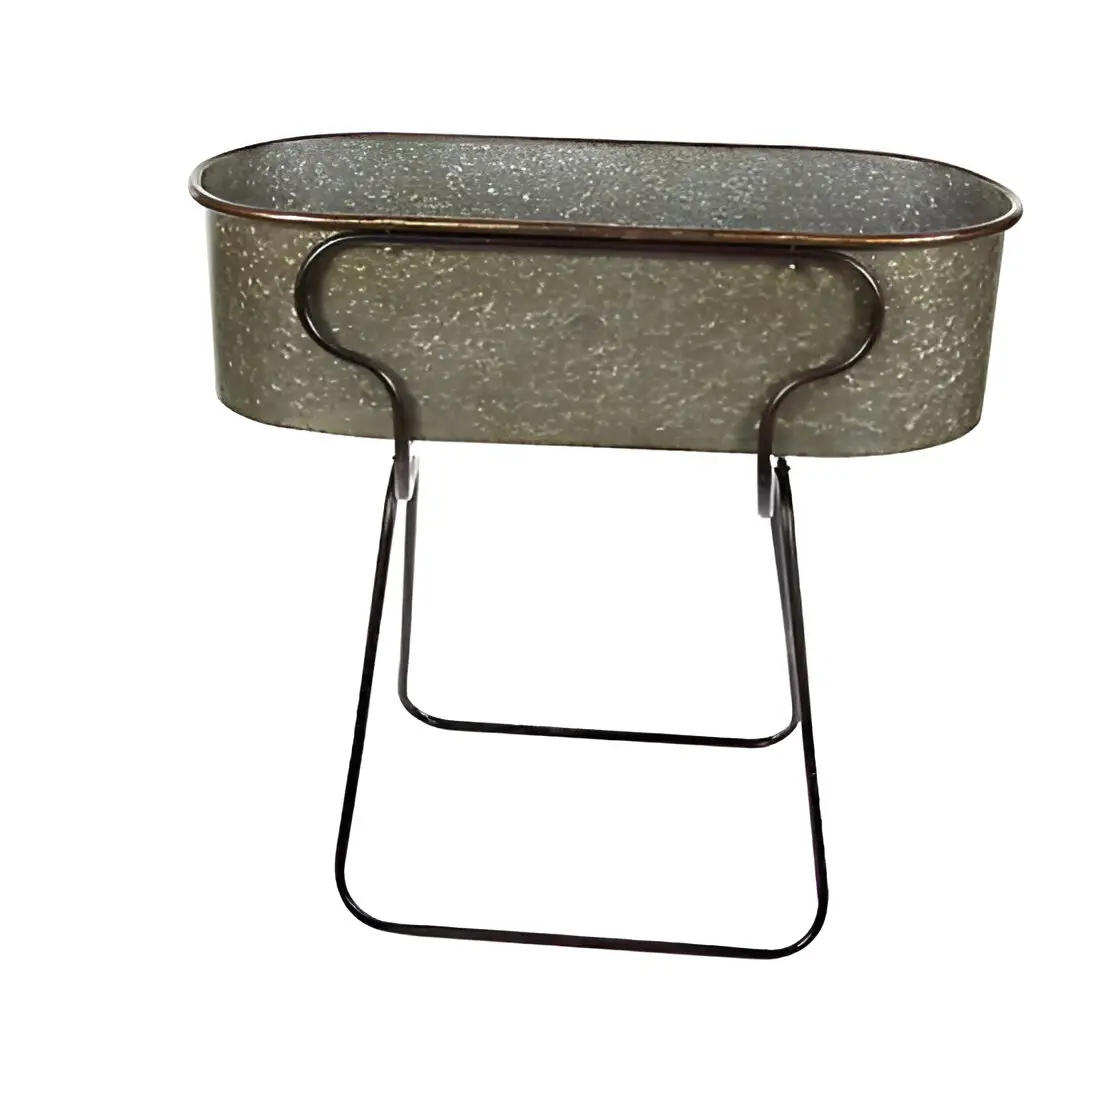 Hot Selling Iron Stand wrought Iron Planter Stands Galvanized Oval Long Planter with Brown Handmade Planter in Low Price